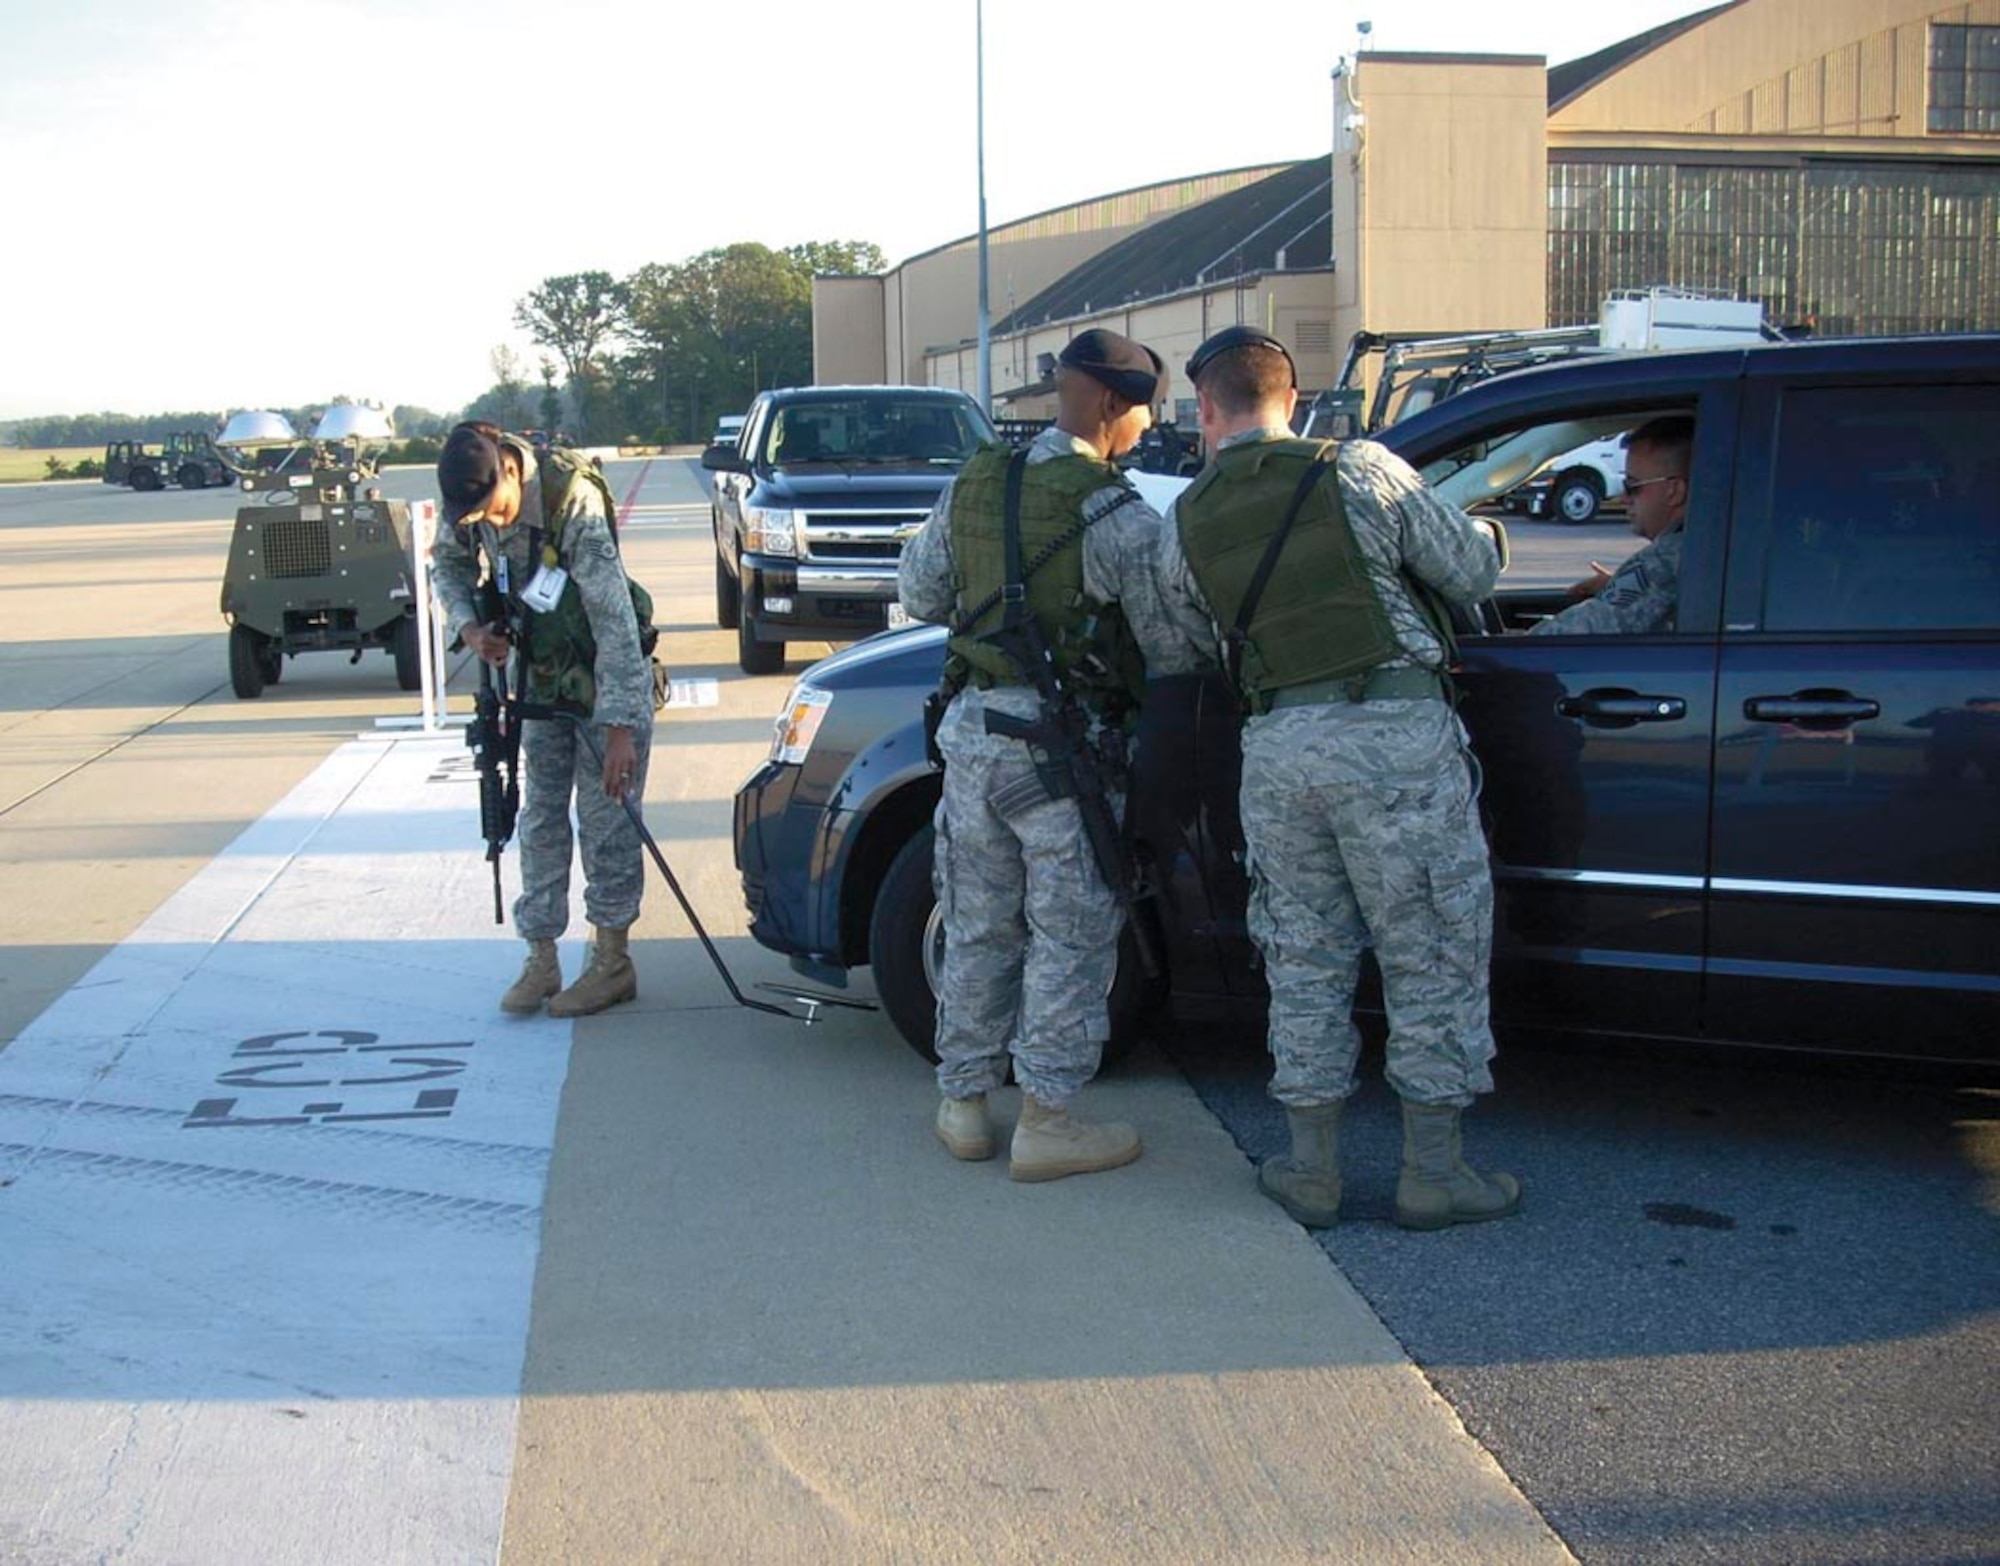 Staff Sgt. Cyrene Gerard, 459th Security Forces Squadron security specialist, performs a vehicle inspection while two other security forces Airmen talk to the driver during the 459th's Nuclear Operational Readiness Inspection held Sept. 19-21. (USAF courtesy photo)